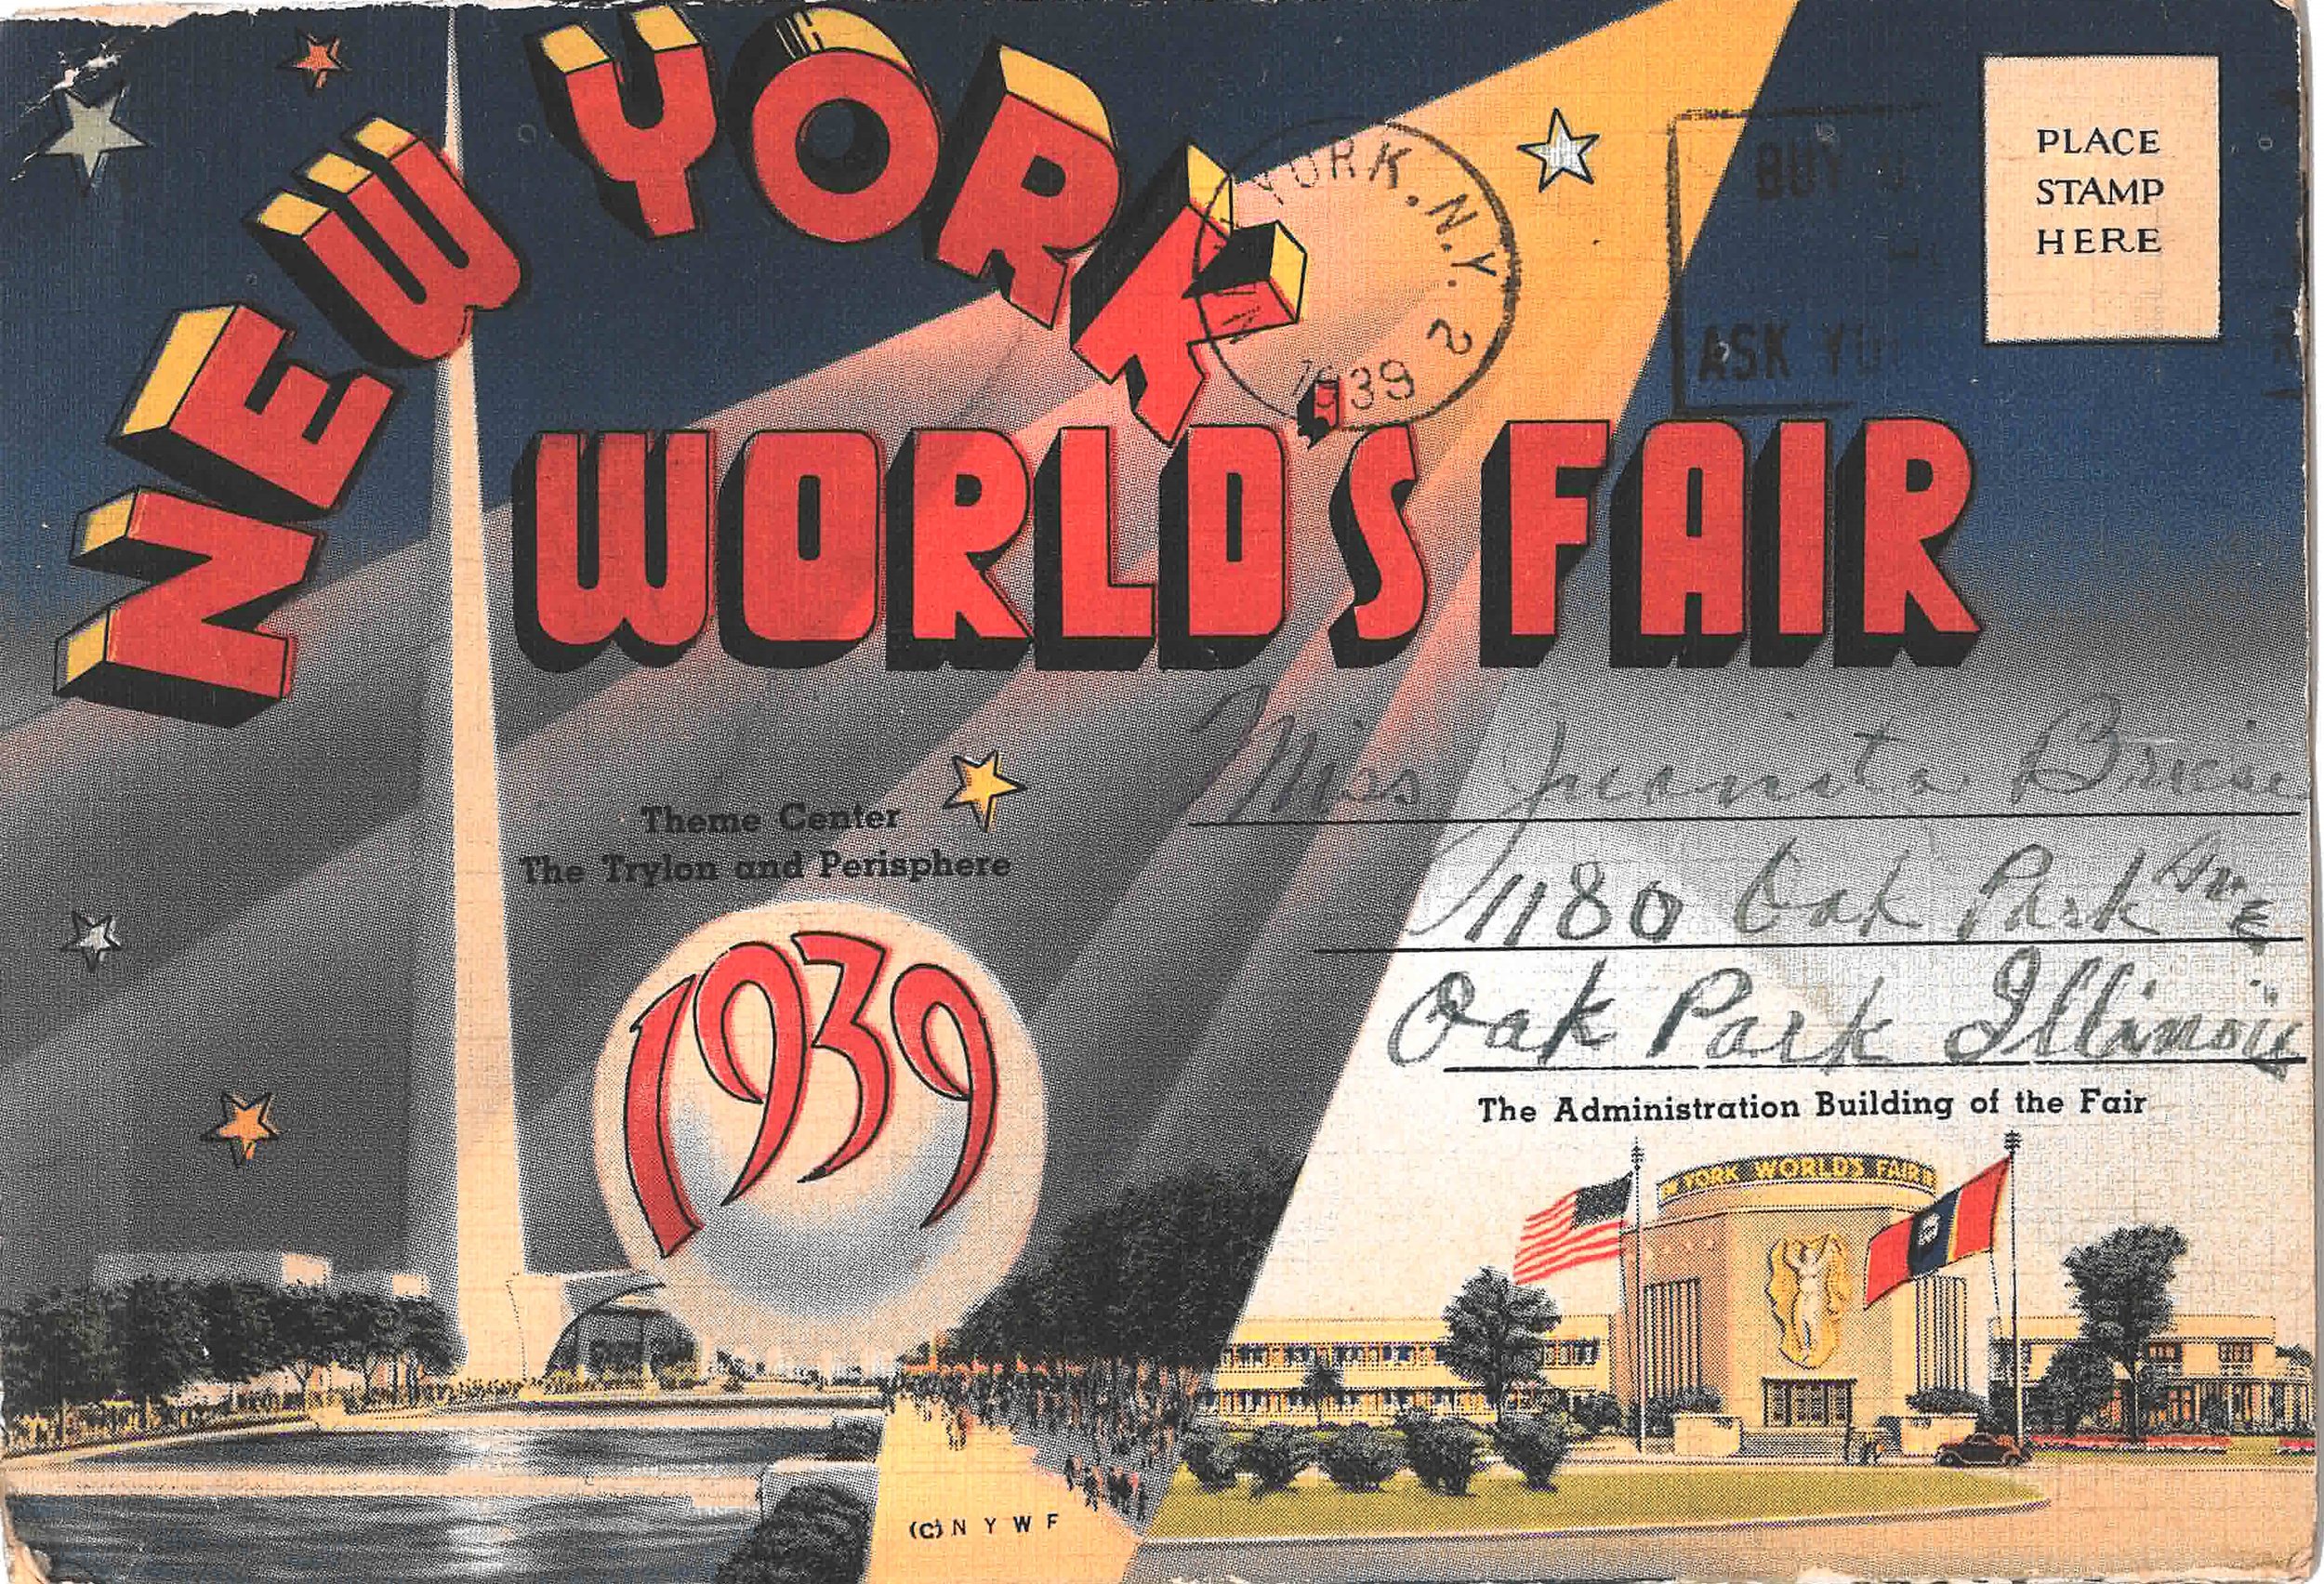 Nice Italy For Your Leisure Travel Brochure 1939 New York Worlds Fair Hand Out 